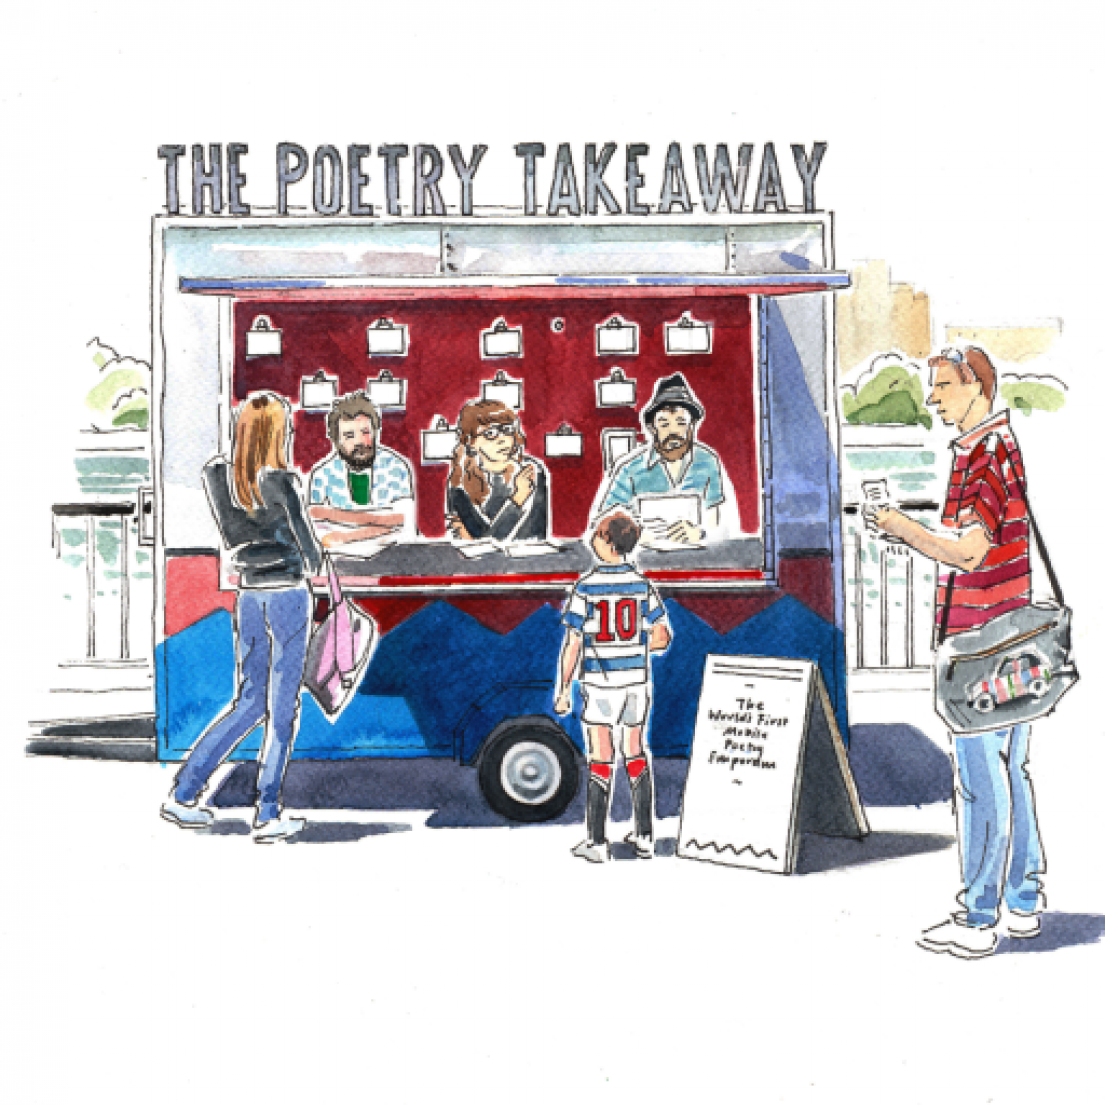 A drawing of a metal trailer with three individuals sat inside writing poems, with customers waiting. On top of the van reads 'The Poetry Takeaway'.